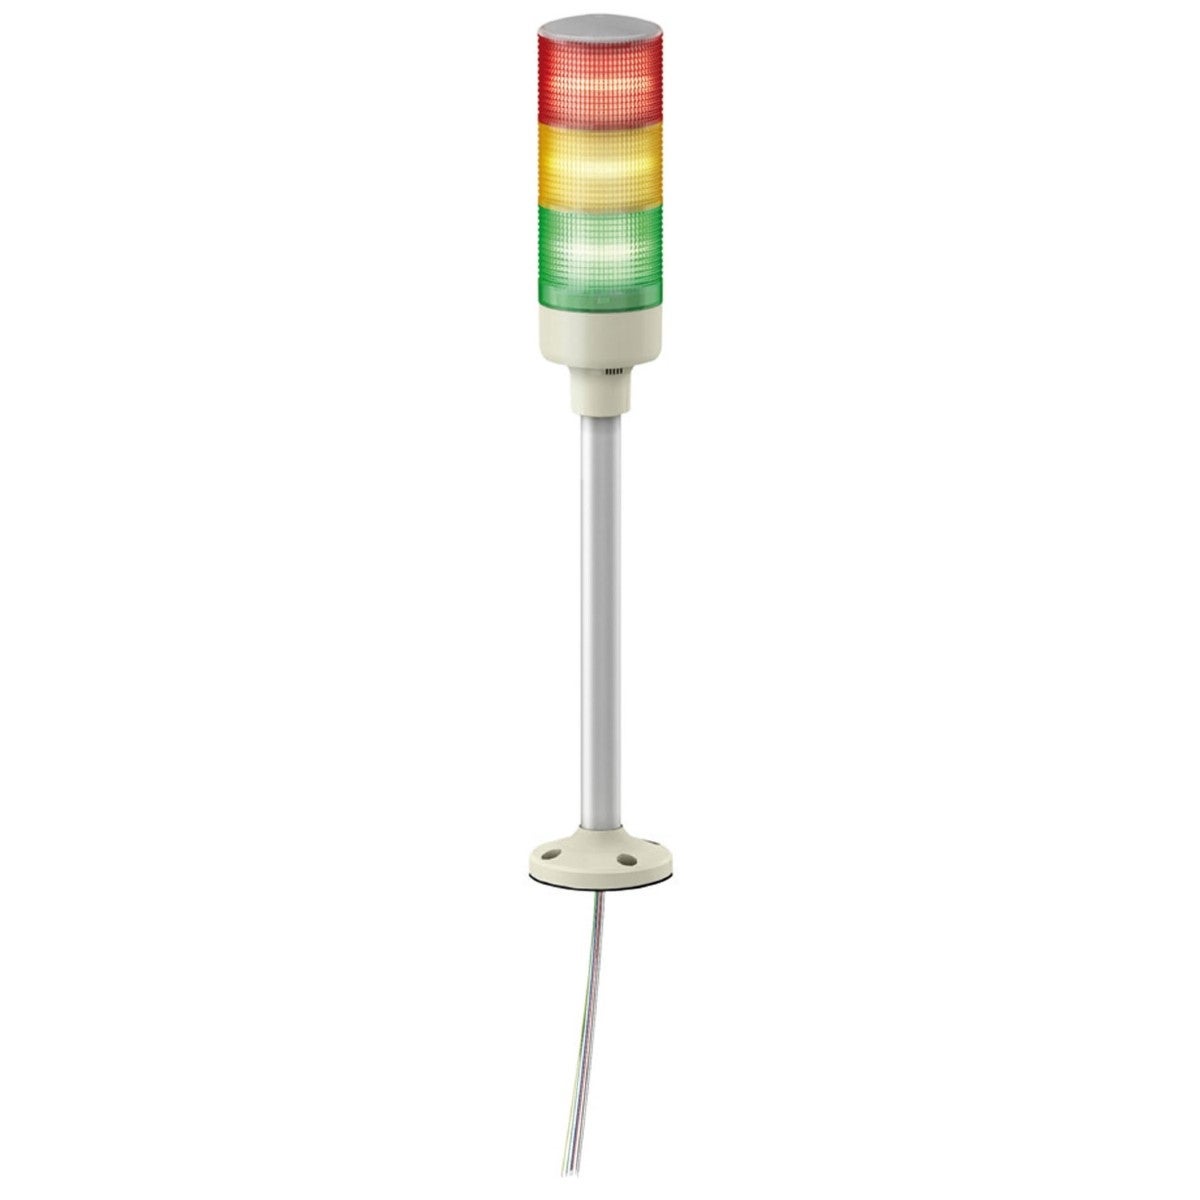 Monolithic tower lights, Harmony XVG, 60mm, red orange green, steady light, aluminium tube mounting and fixing plate, IP53, 24V AC/DC